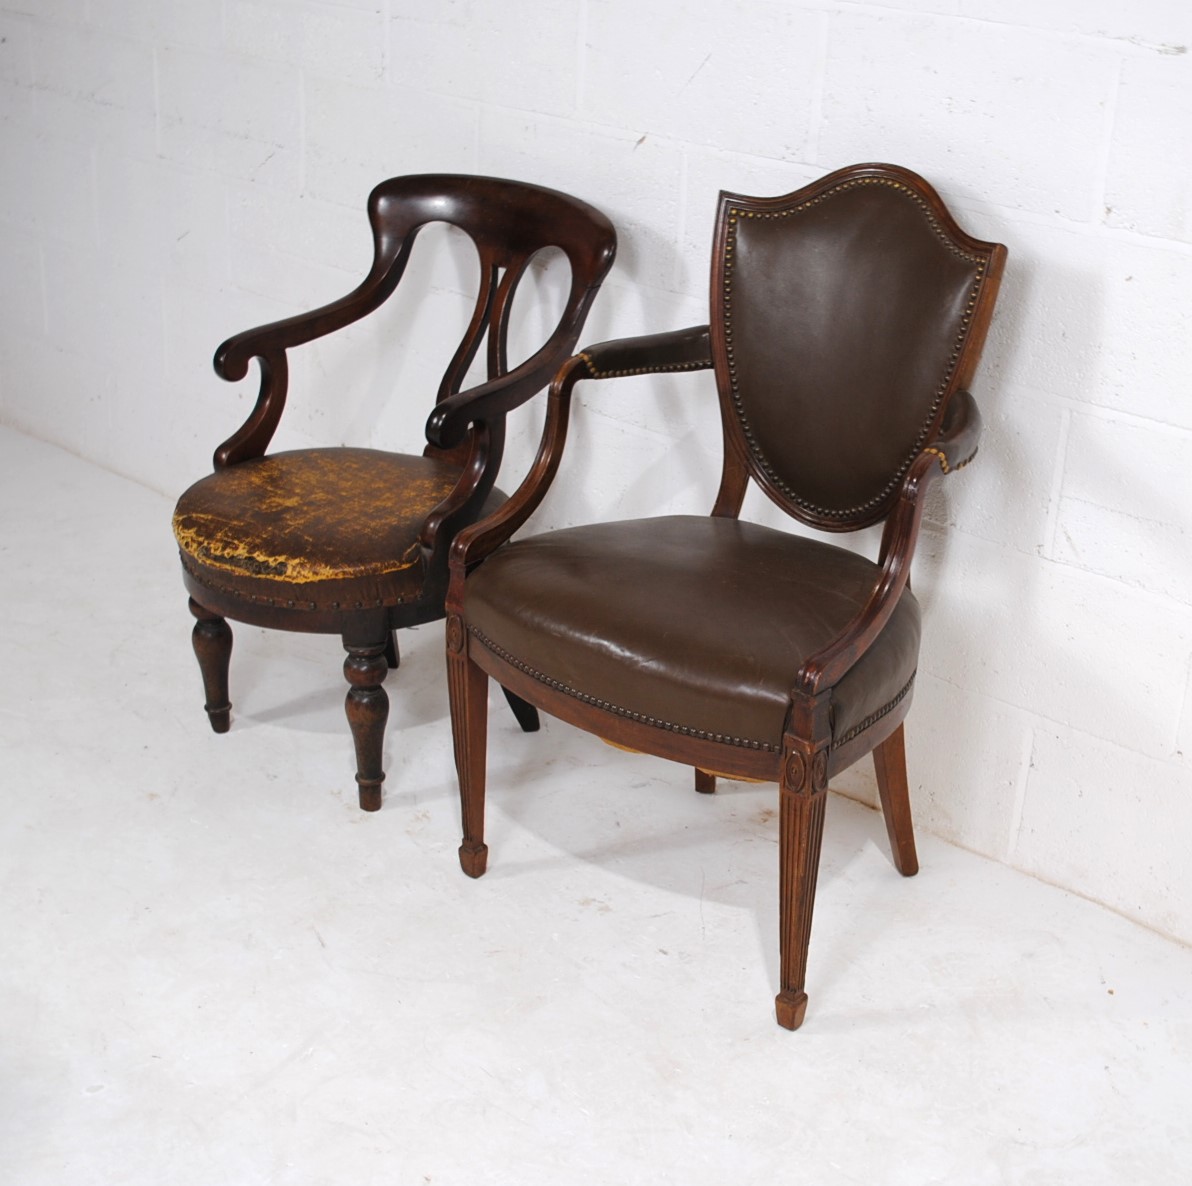 A Victorian mahogany chair, along with an antique mahogany upholstered shield back chair - Image 3 of 3